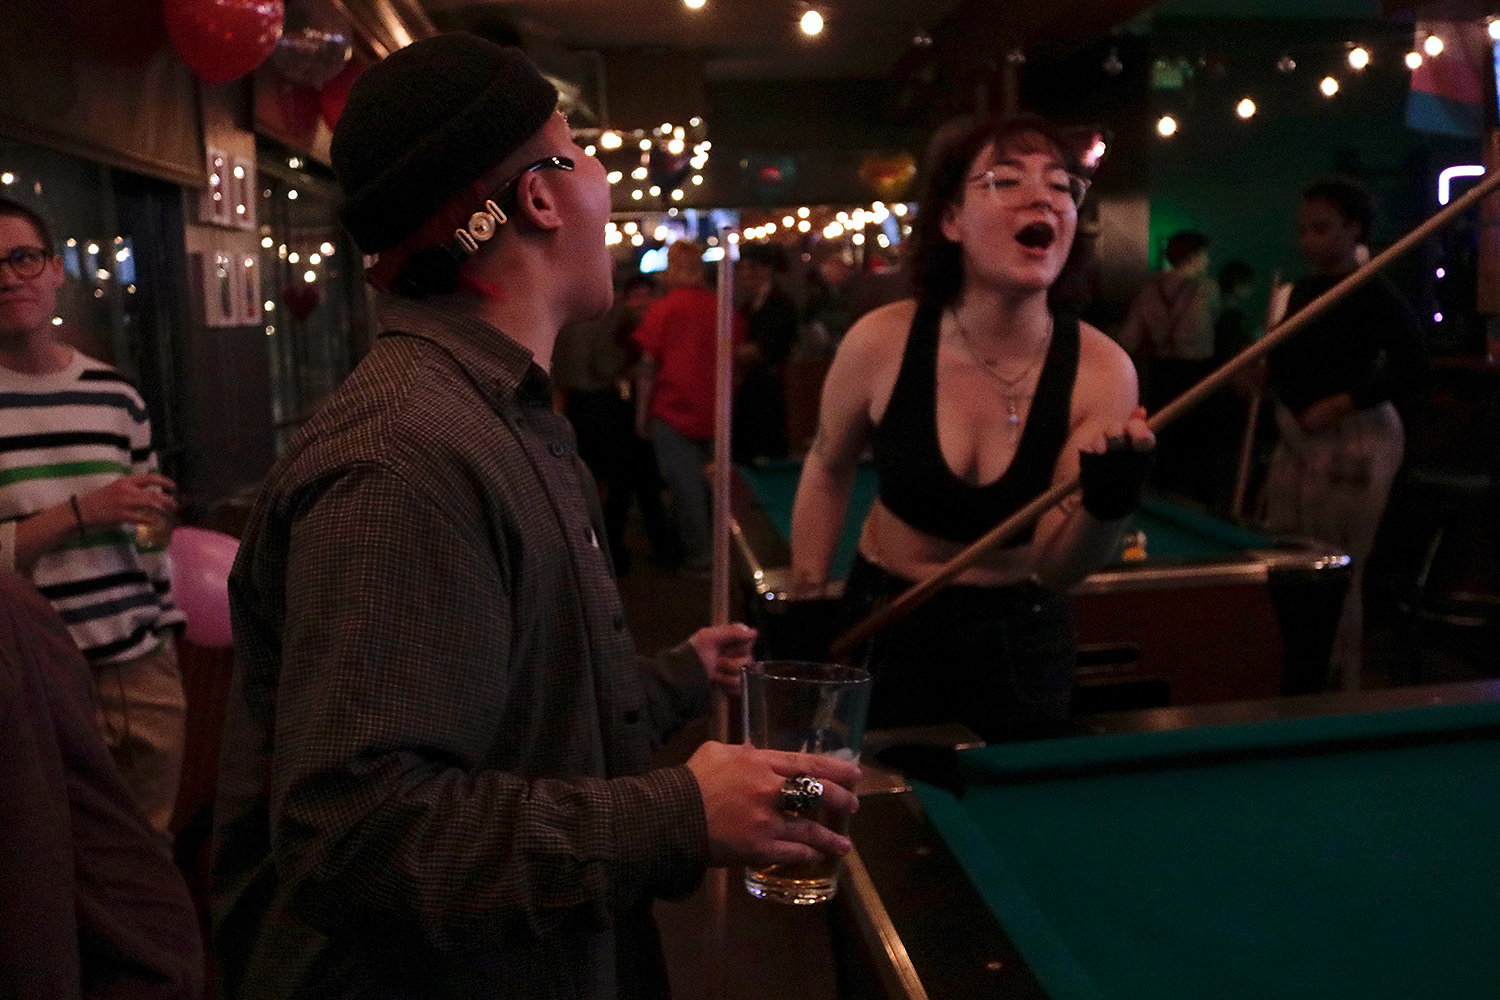 Two people playing pool in a bar